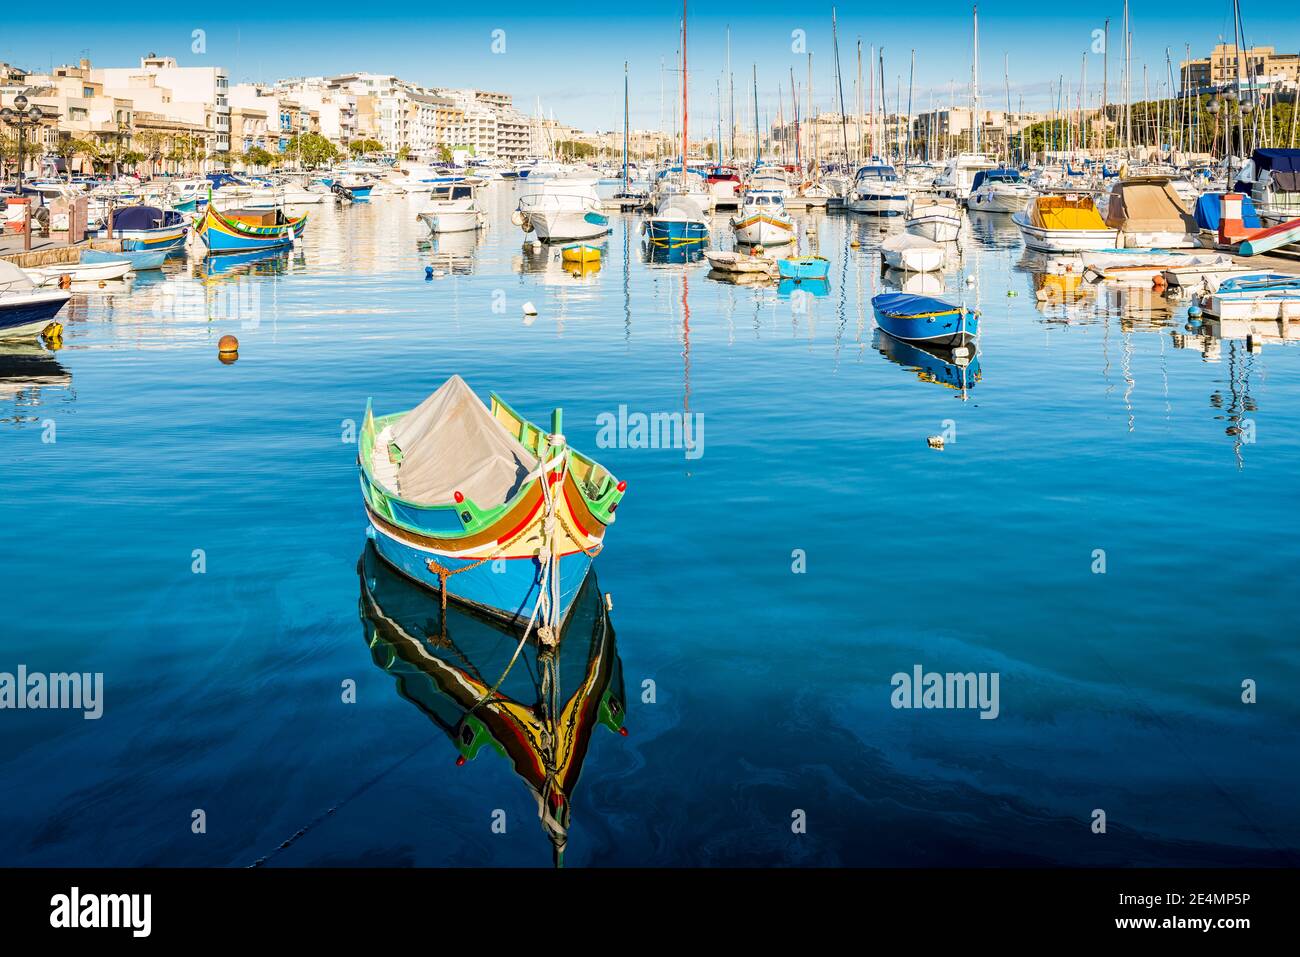 Typical fishing boats in the small port of Sliema on the island of Malta Stock Photo